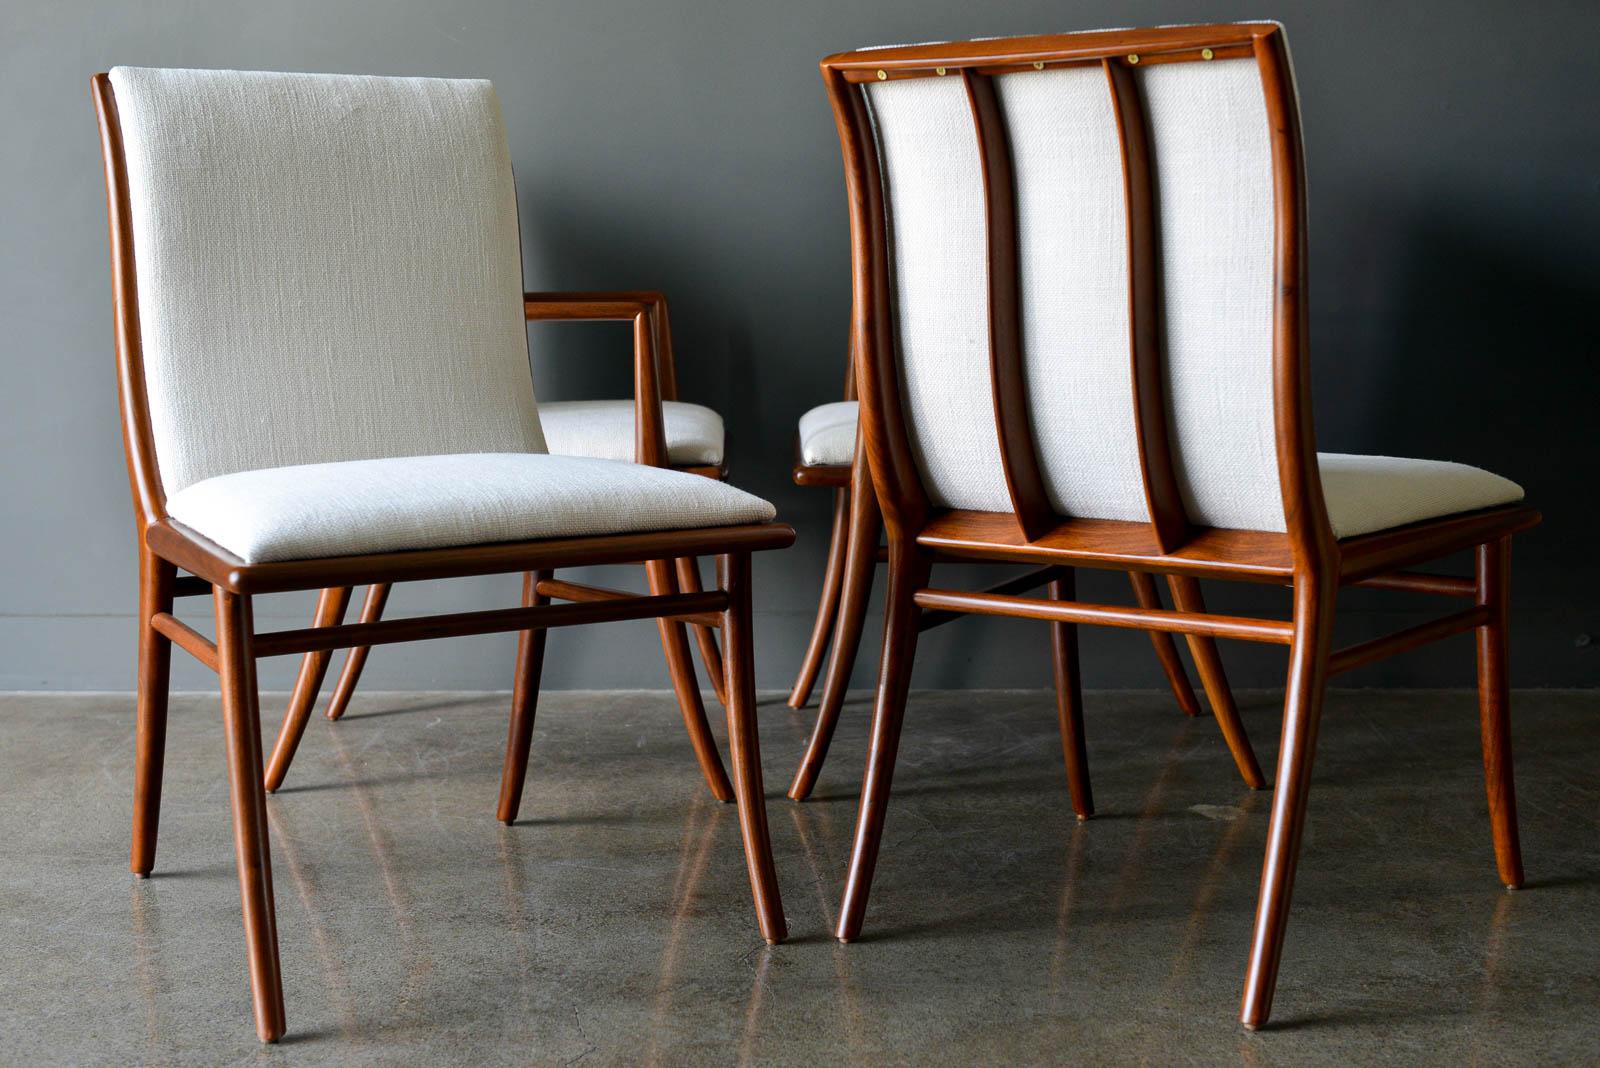 Mid-20th Century Walnut Dining Chairs by T.H. Robsjohn-Gibbings for Widdicomb, ca. 1960